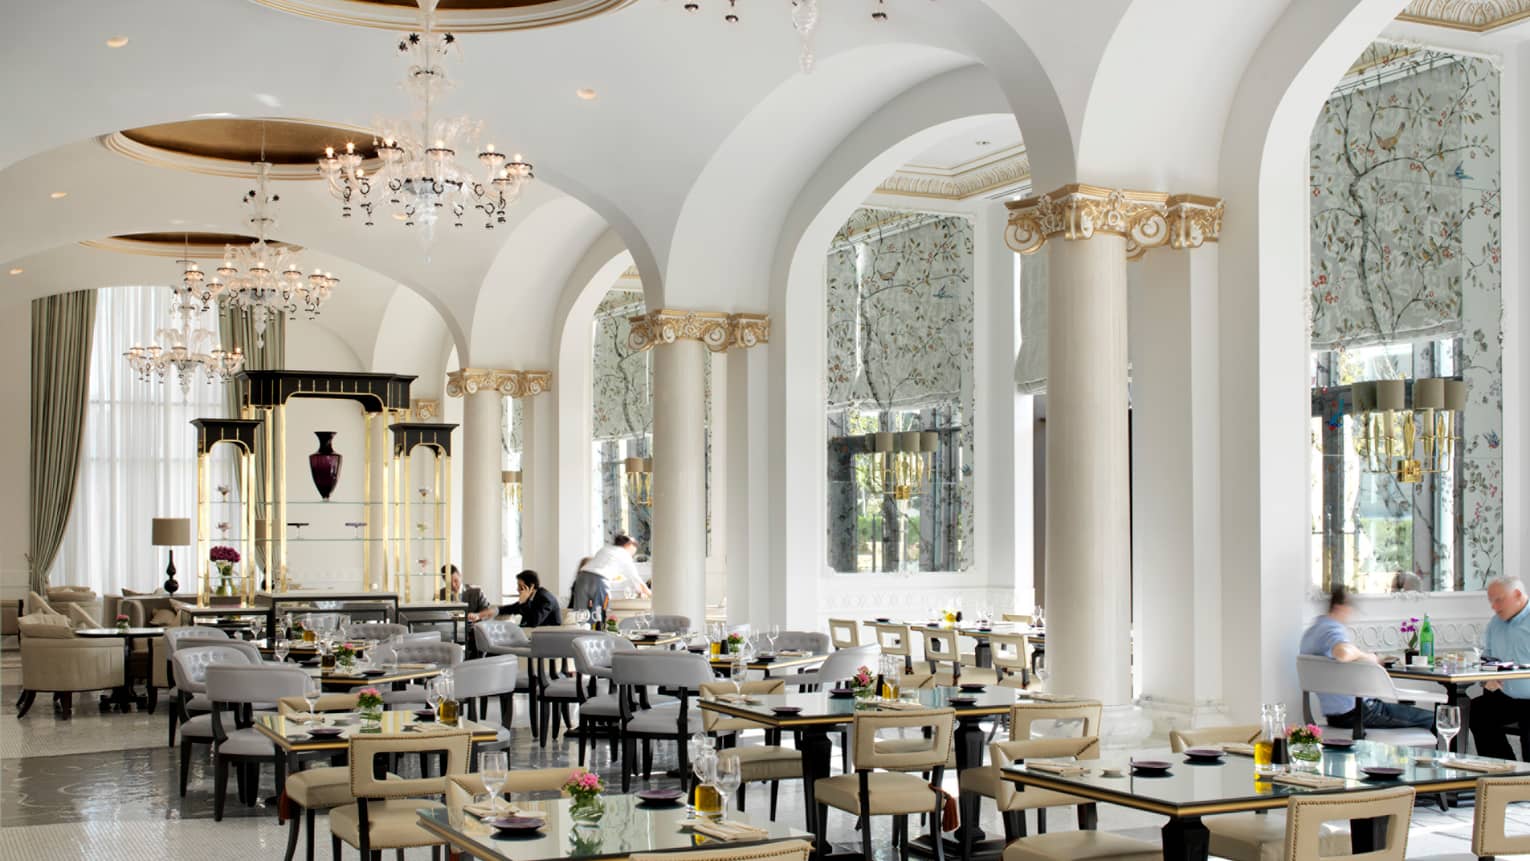 Bright Zafferano dining room with tall sweeping white ceiling, white pillars with decorative gold trim, tables and chairs below